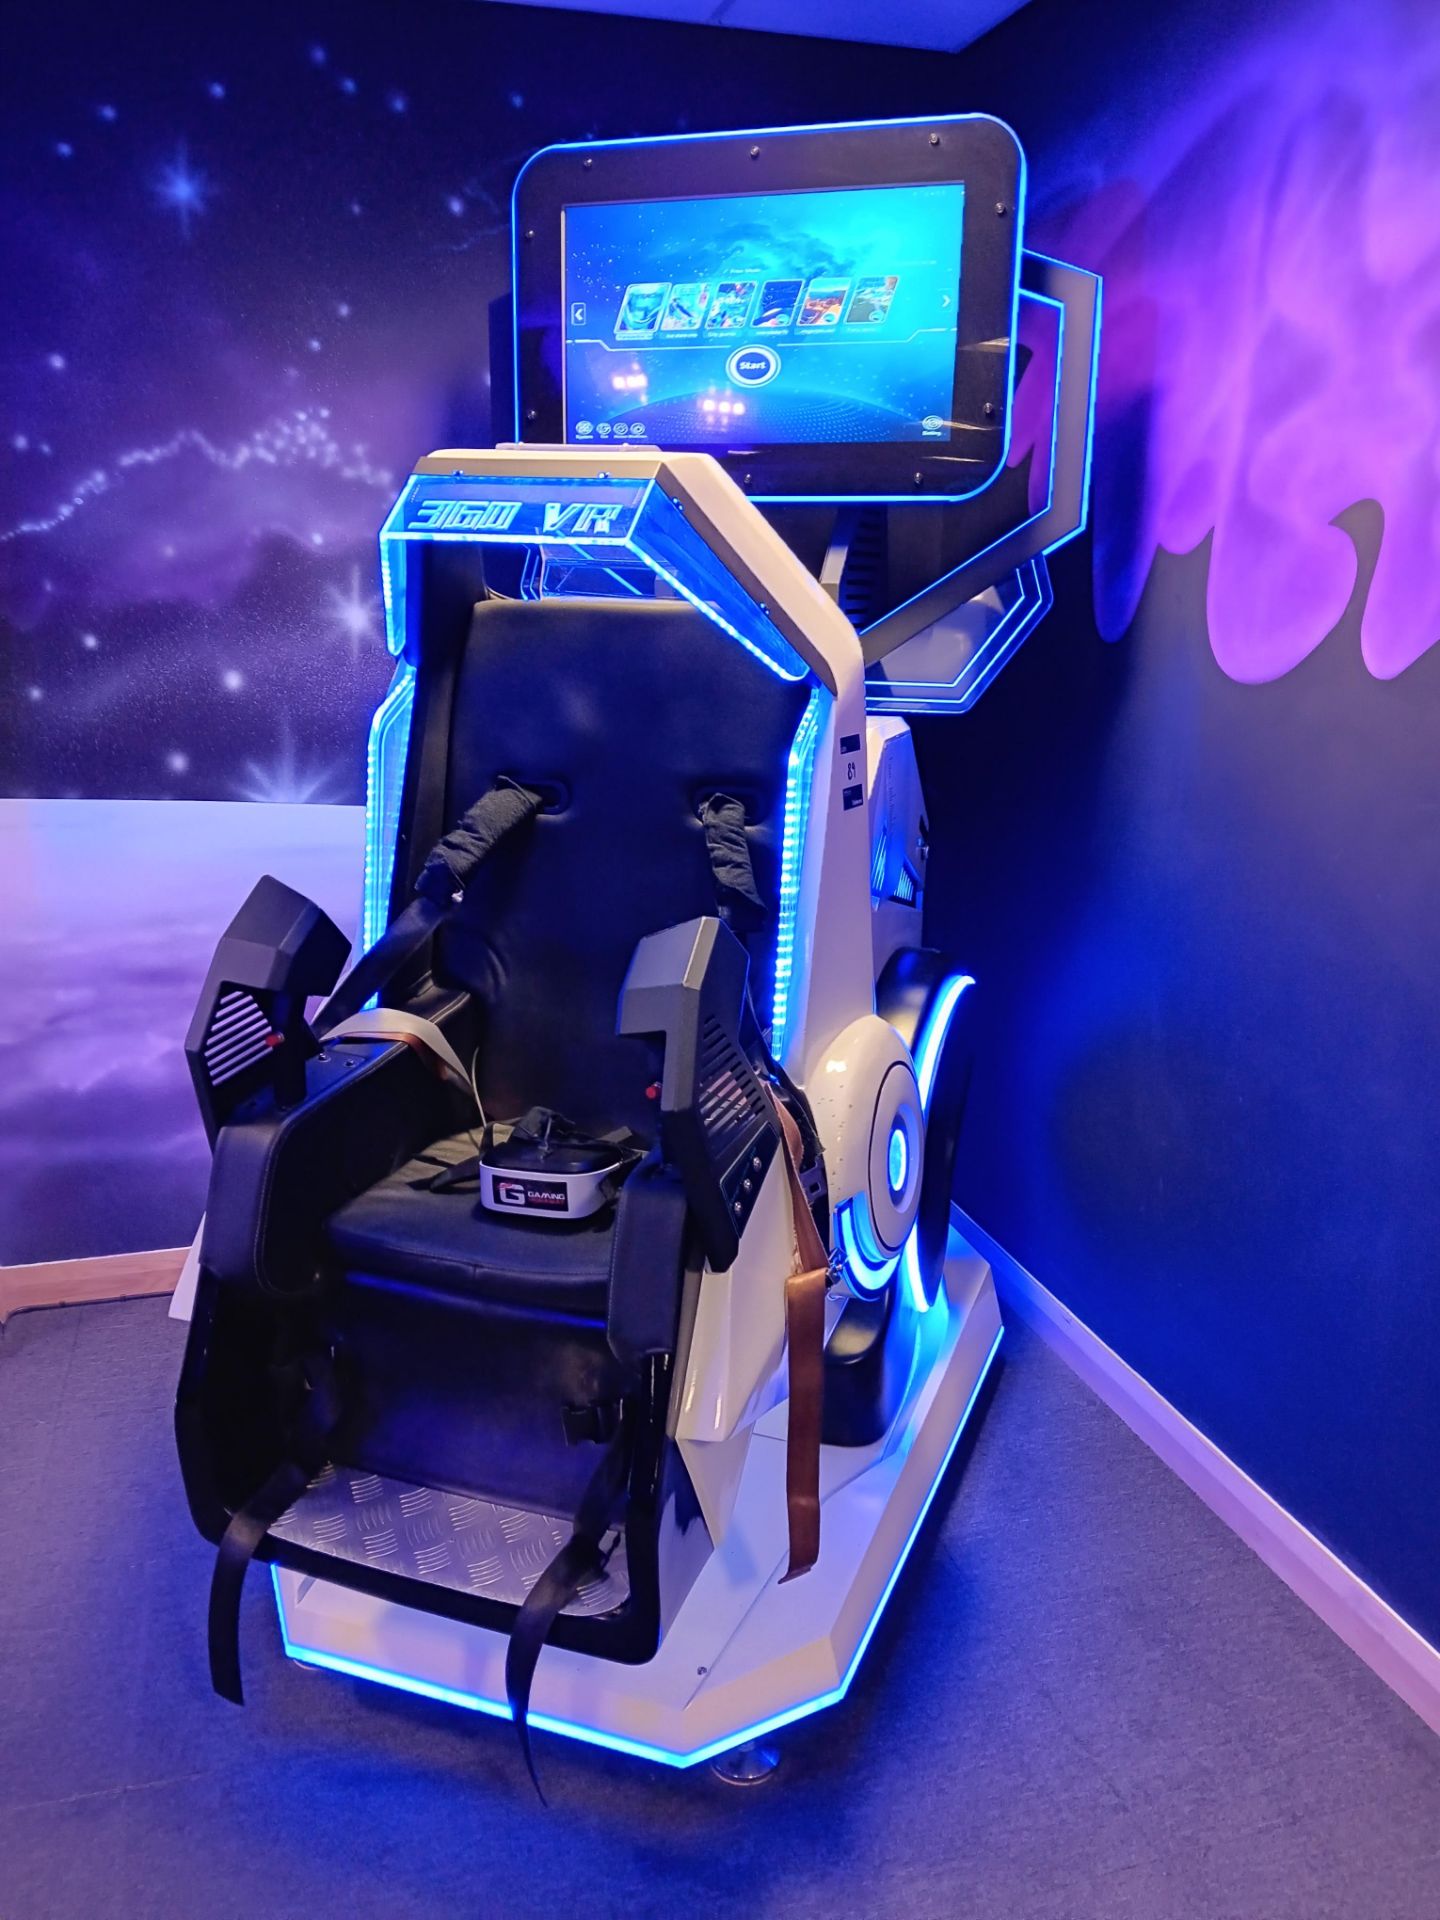 Owatch 360 Degree Rotating VR Chair Roller Coaster Simulator – Cost New £14,400 – Buyer to - Image 3 of 4